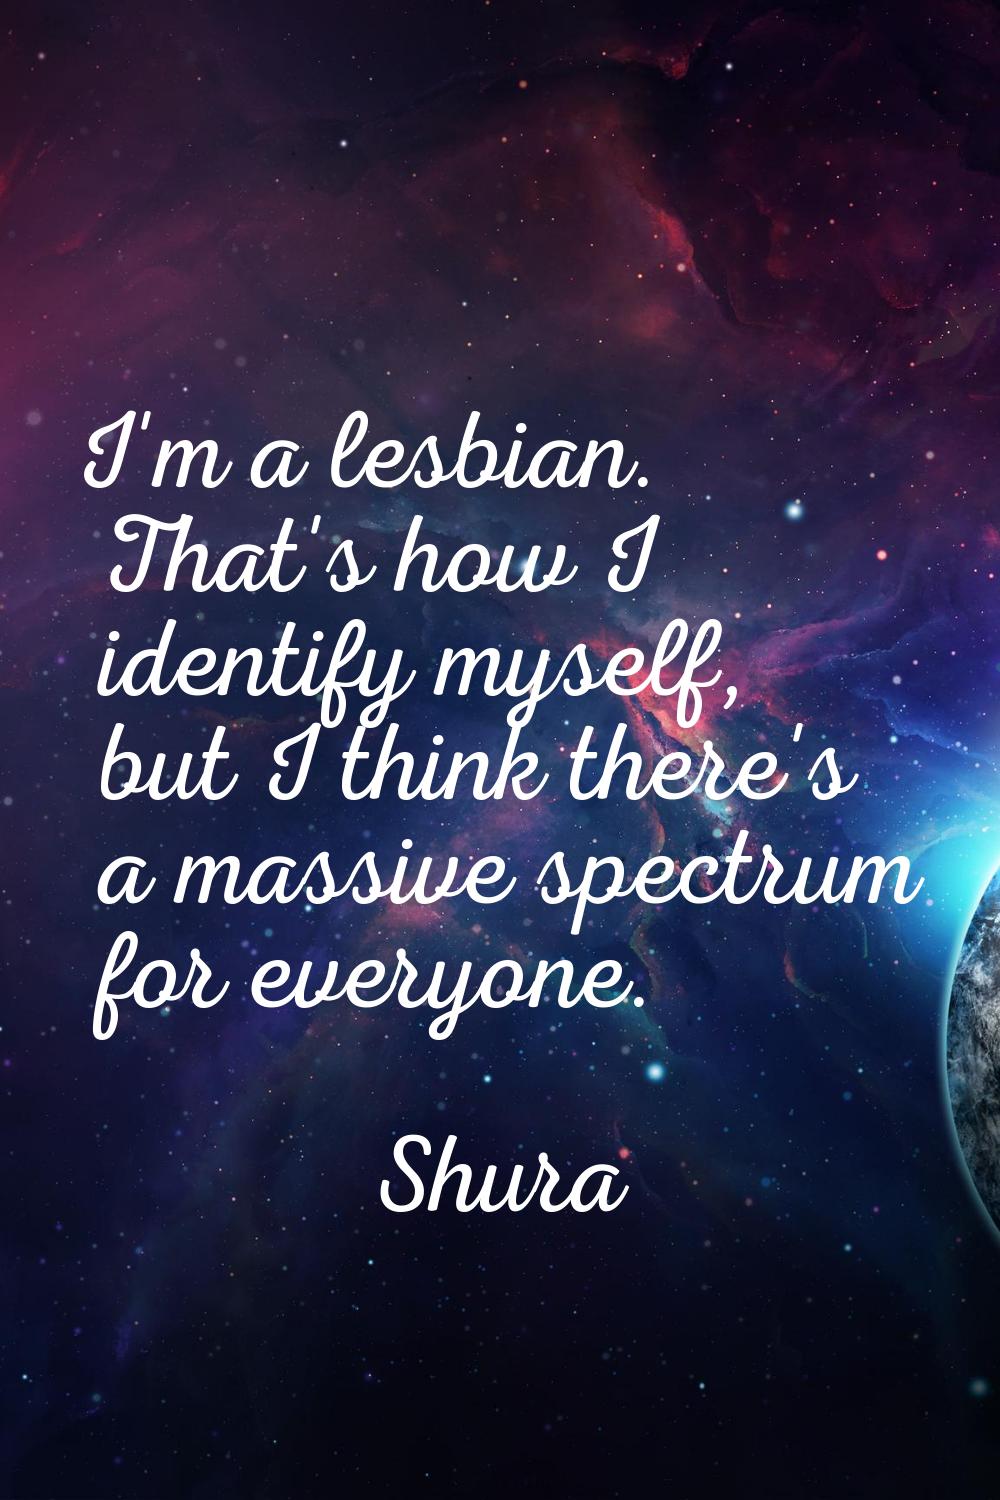 I'm a lesbian. That's how I identify myself, but I think there's a massive spectrum for everyone.